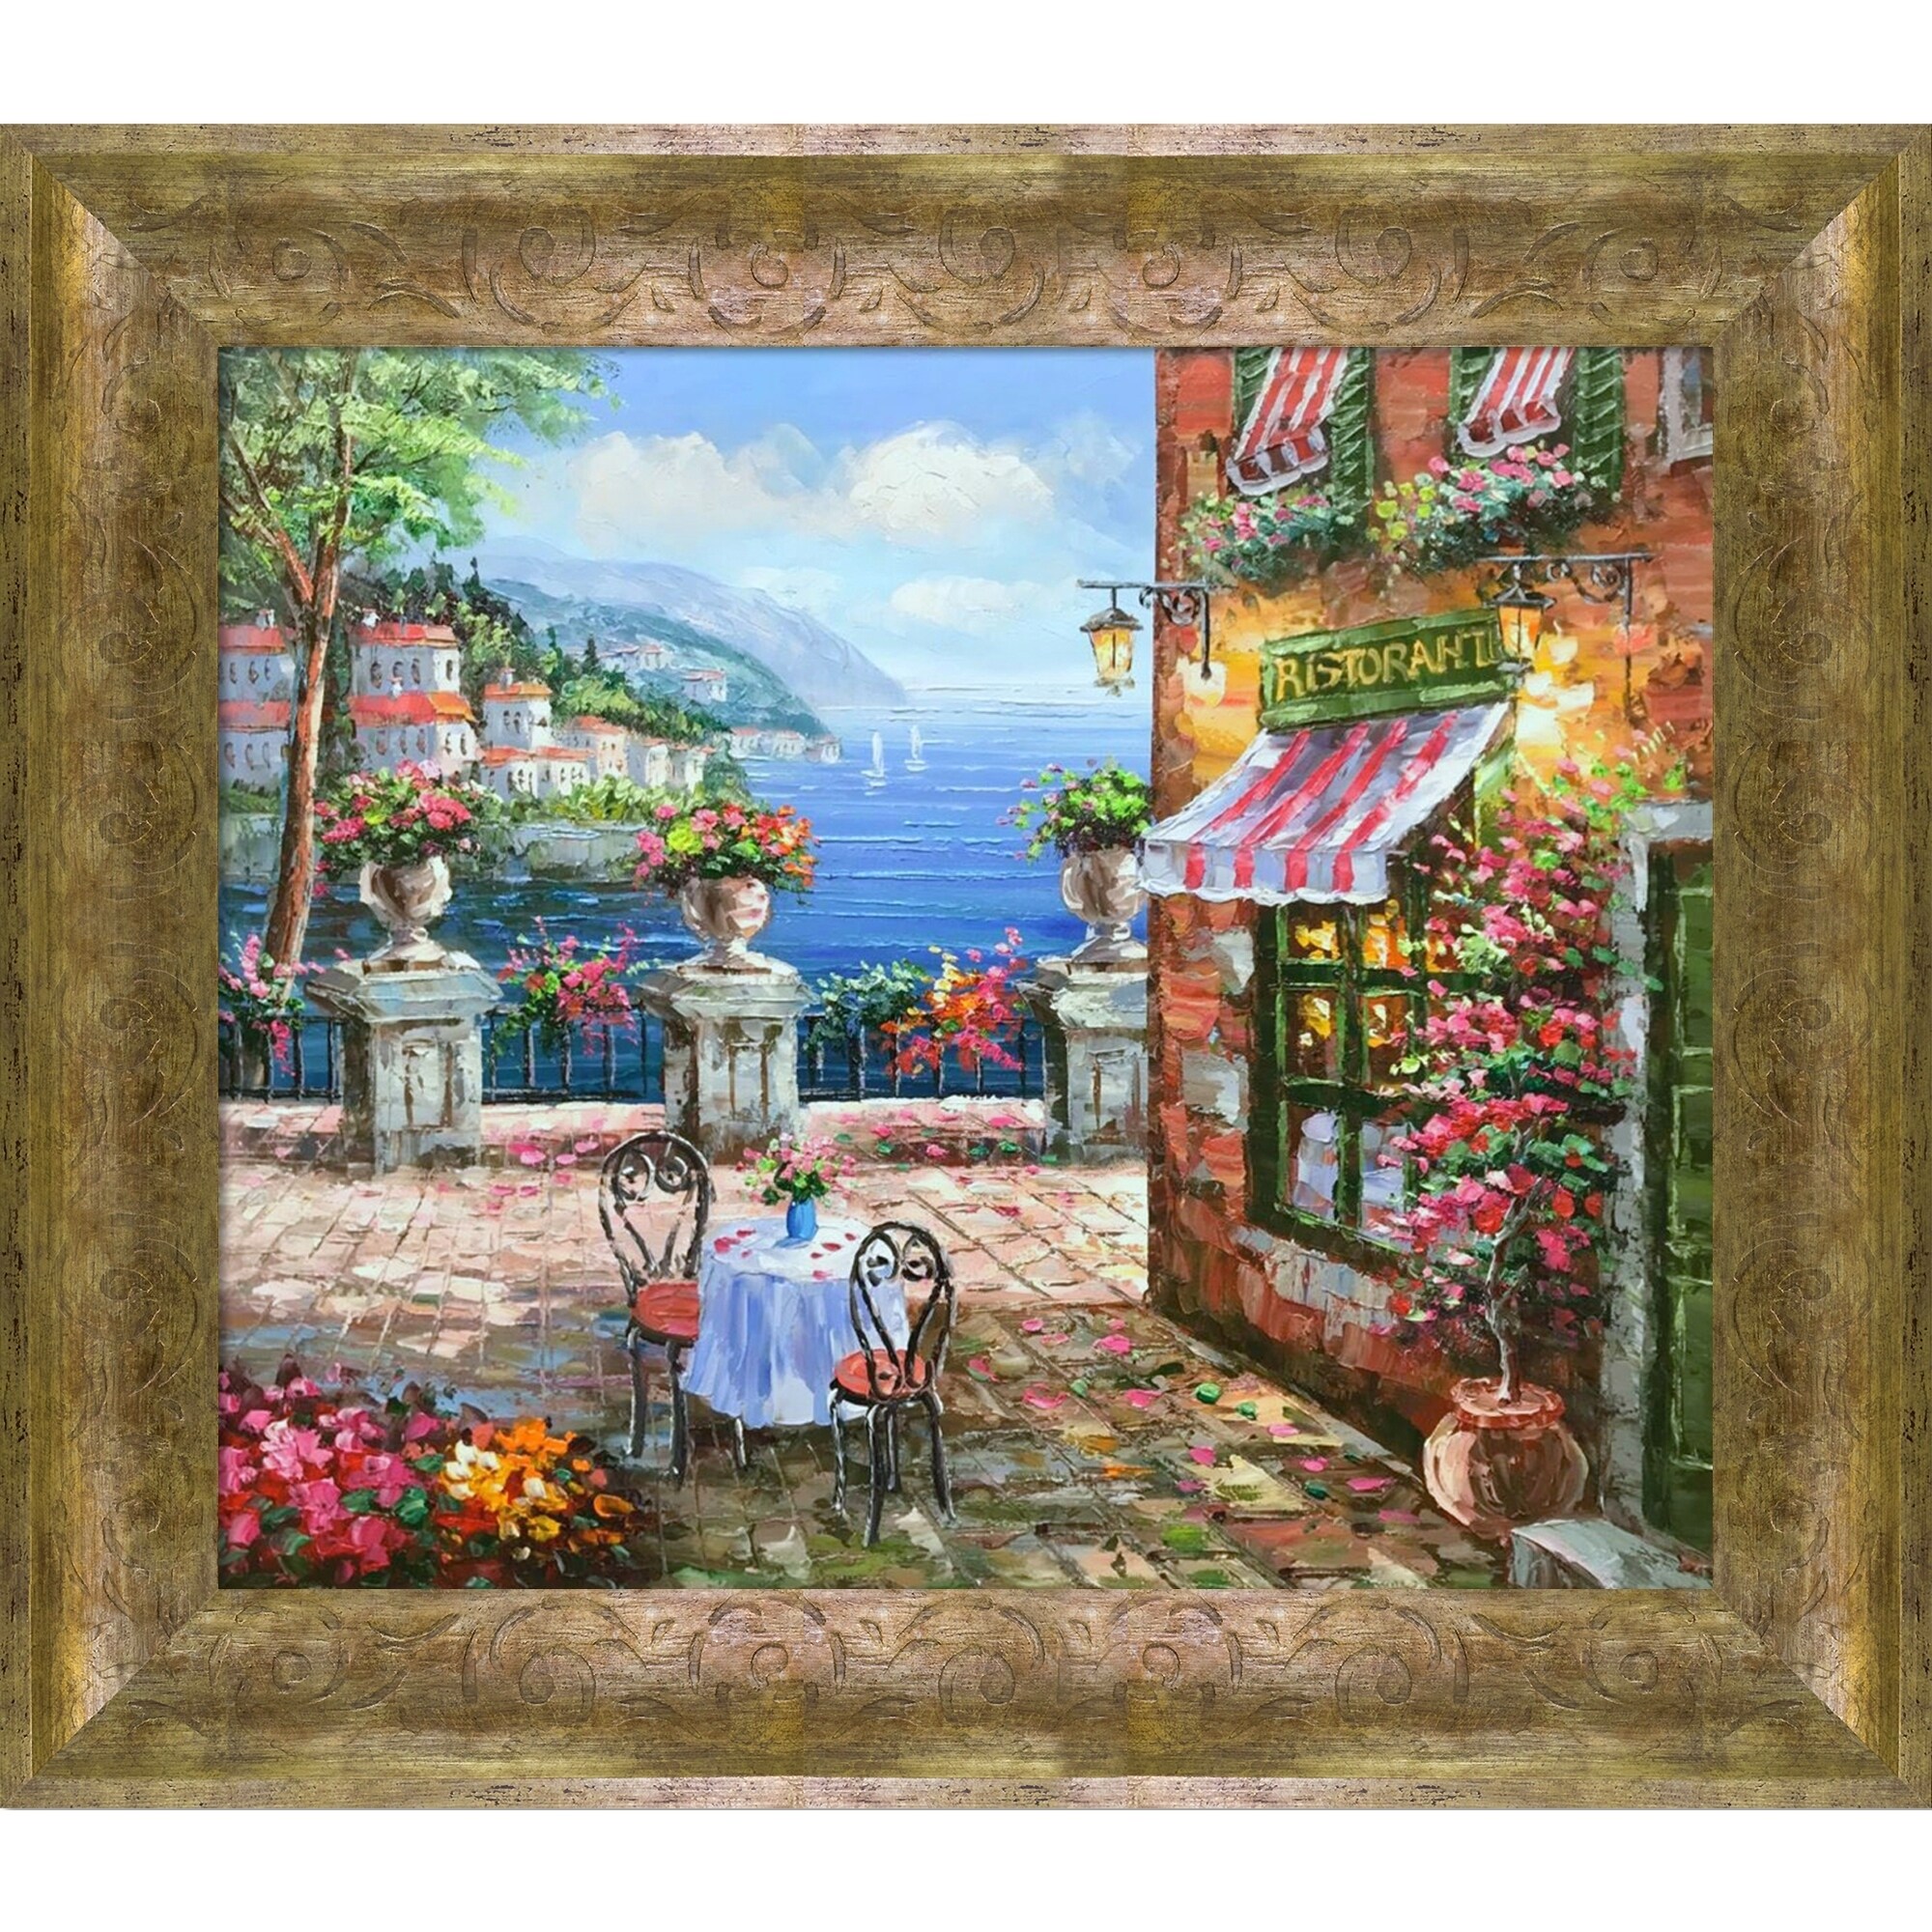 Shop La Pastiche Cafe Italy With Sirocco Frame Oil Painting Wall Art 31 X27 Overstock 30987500